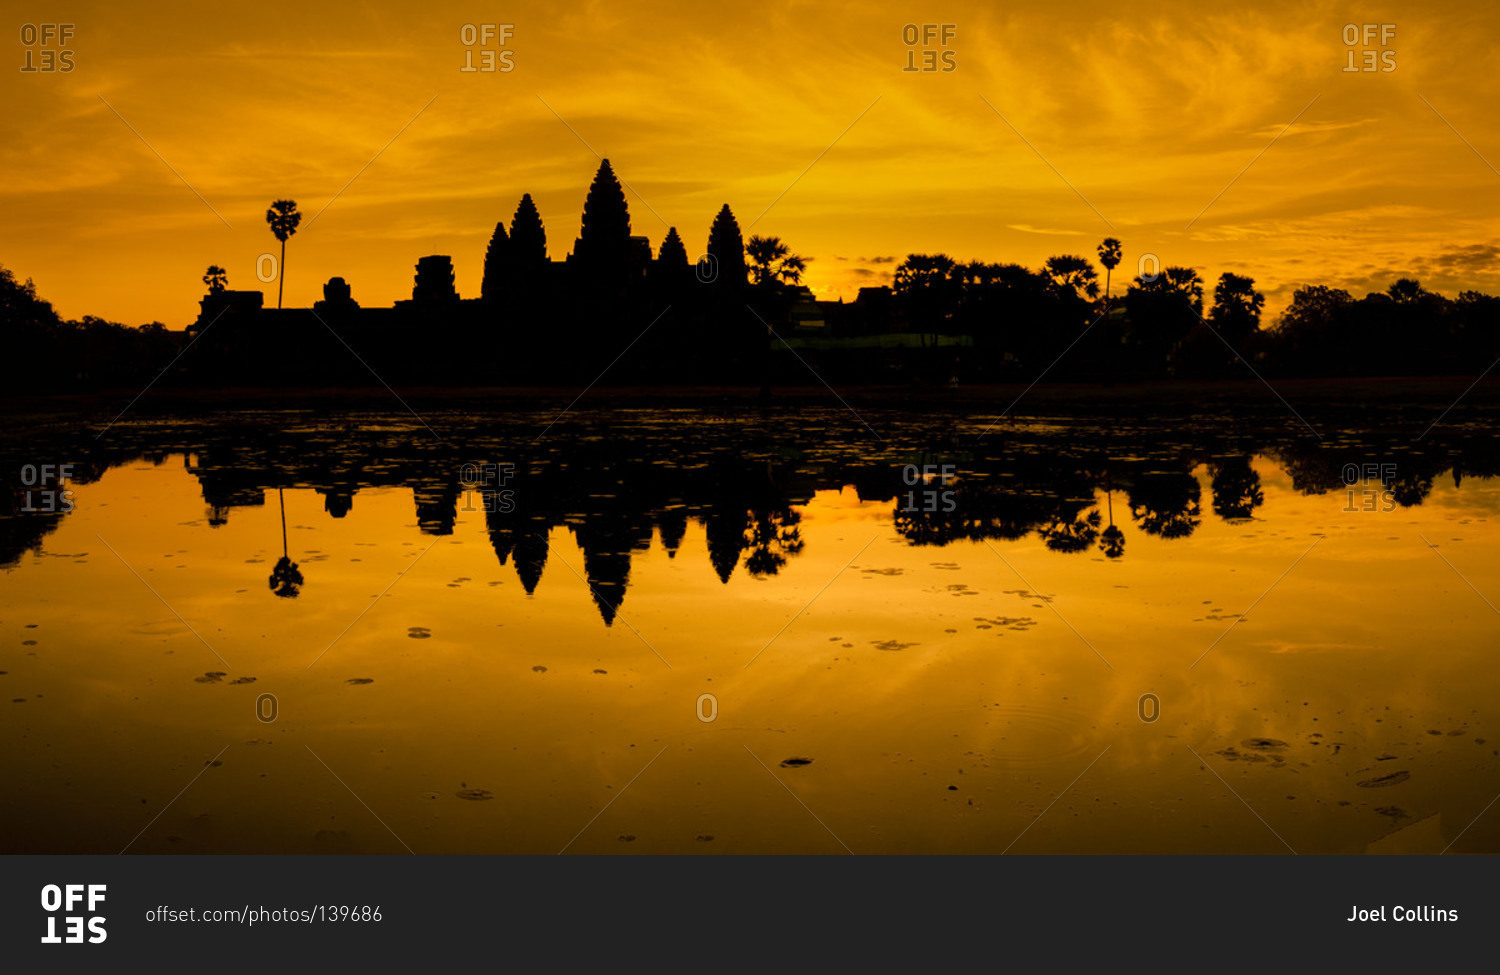 The temples of Angkor Wat silhouetted against a dramatic orange sunrise, Cambodia